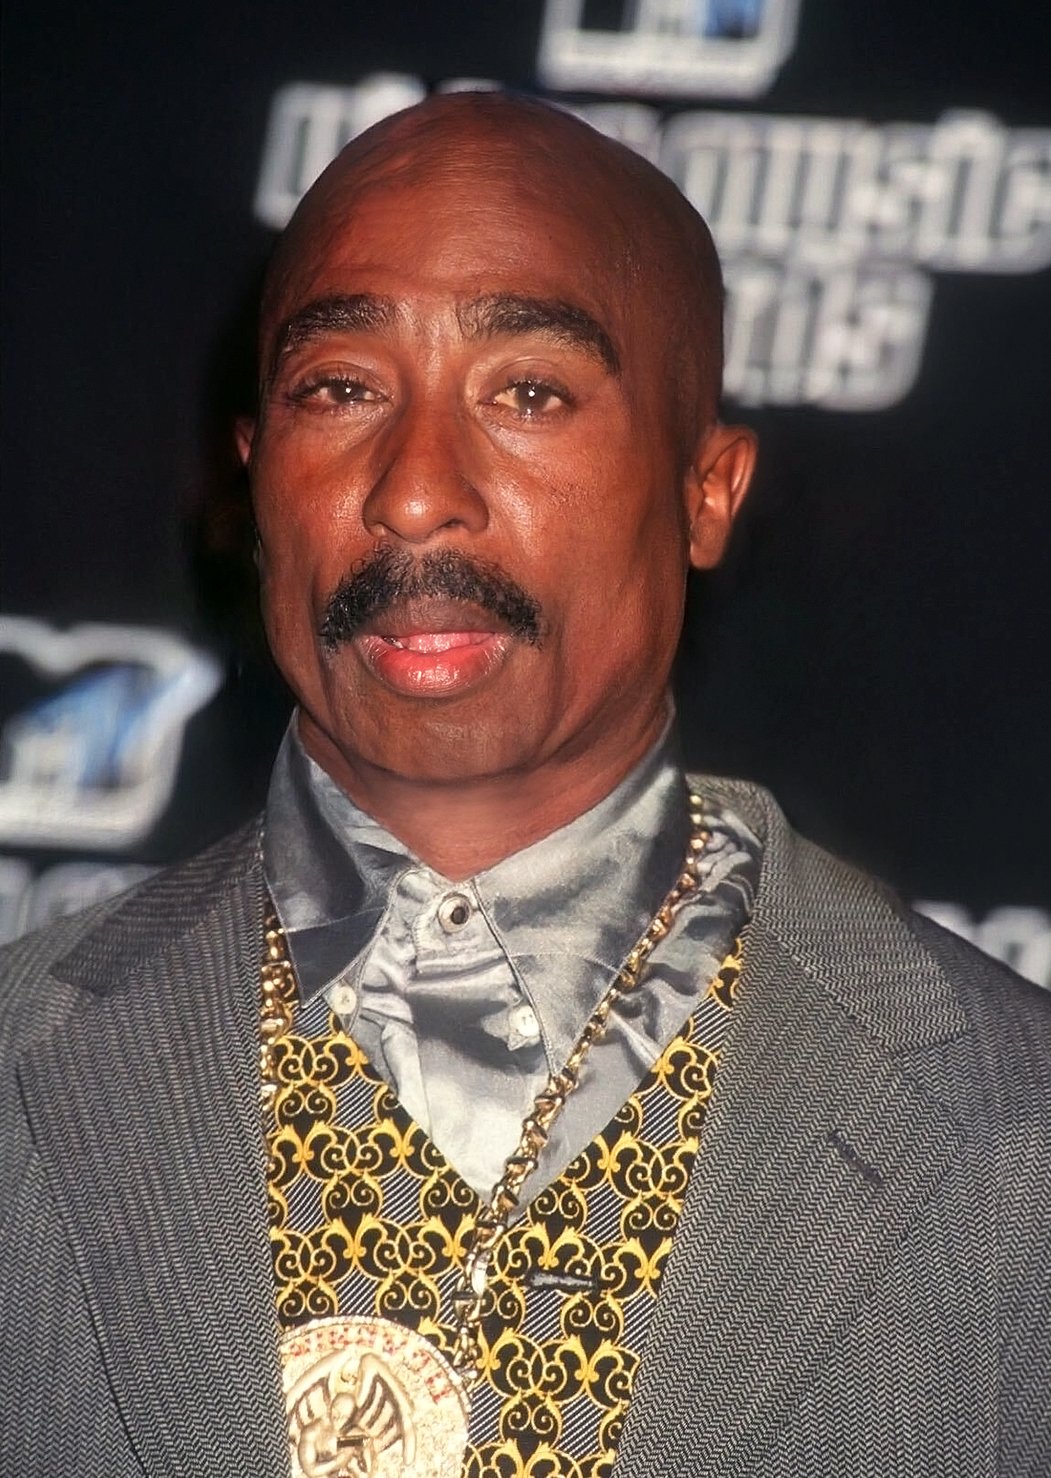 tupac-shakur-a-look-at-tupac-shakur-s-rule-breaking-style-on-and-off